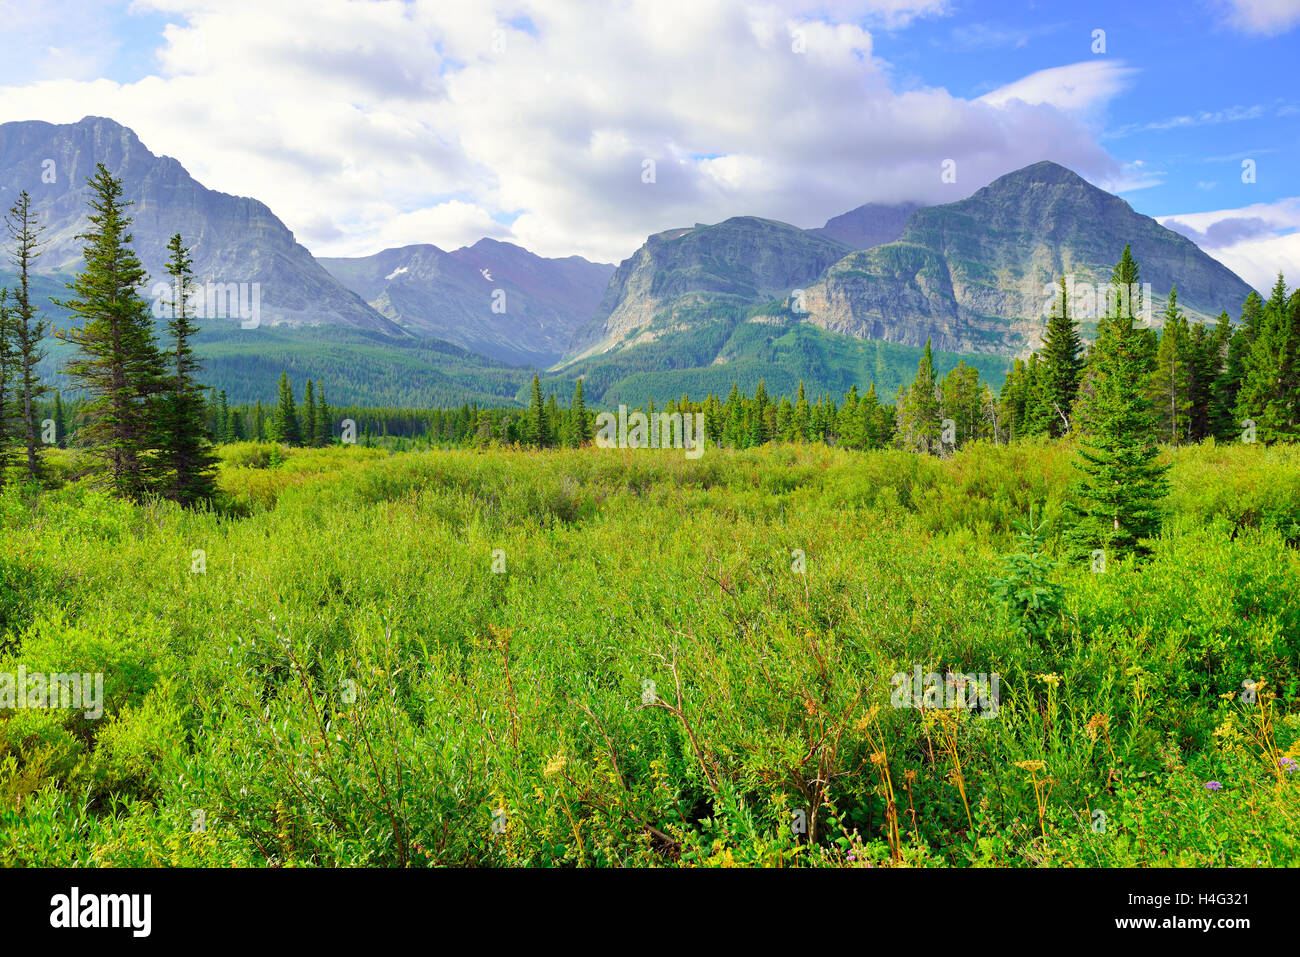 alpine scenery of the Glacier National Park in summer Stock Photo